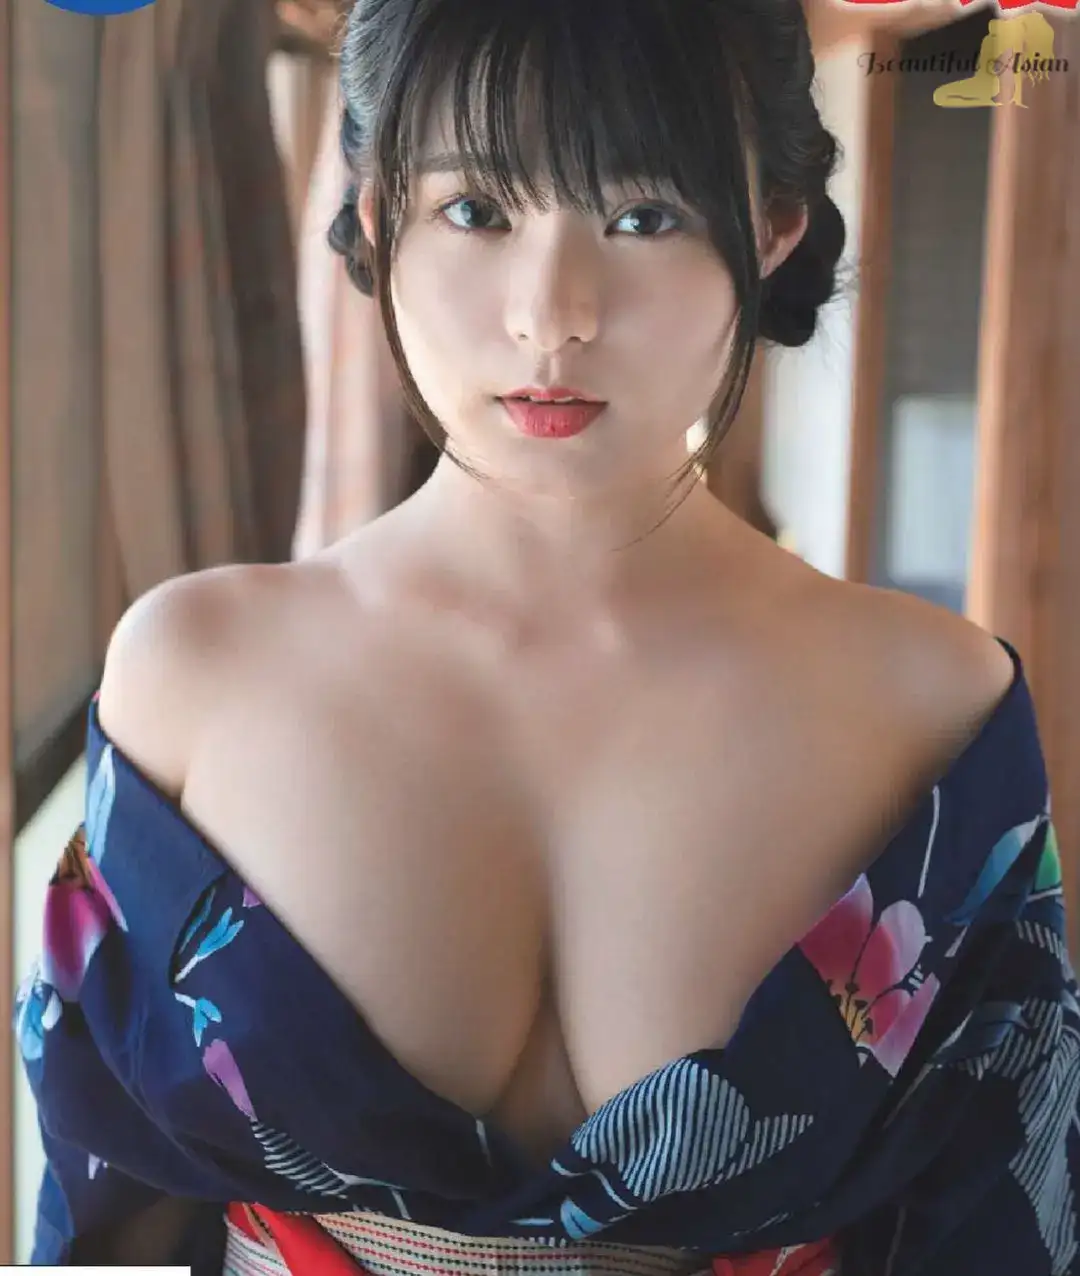 angelic woman from Japan